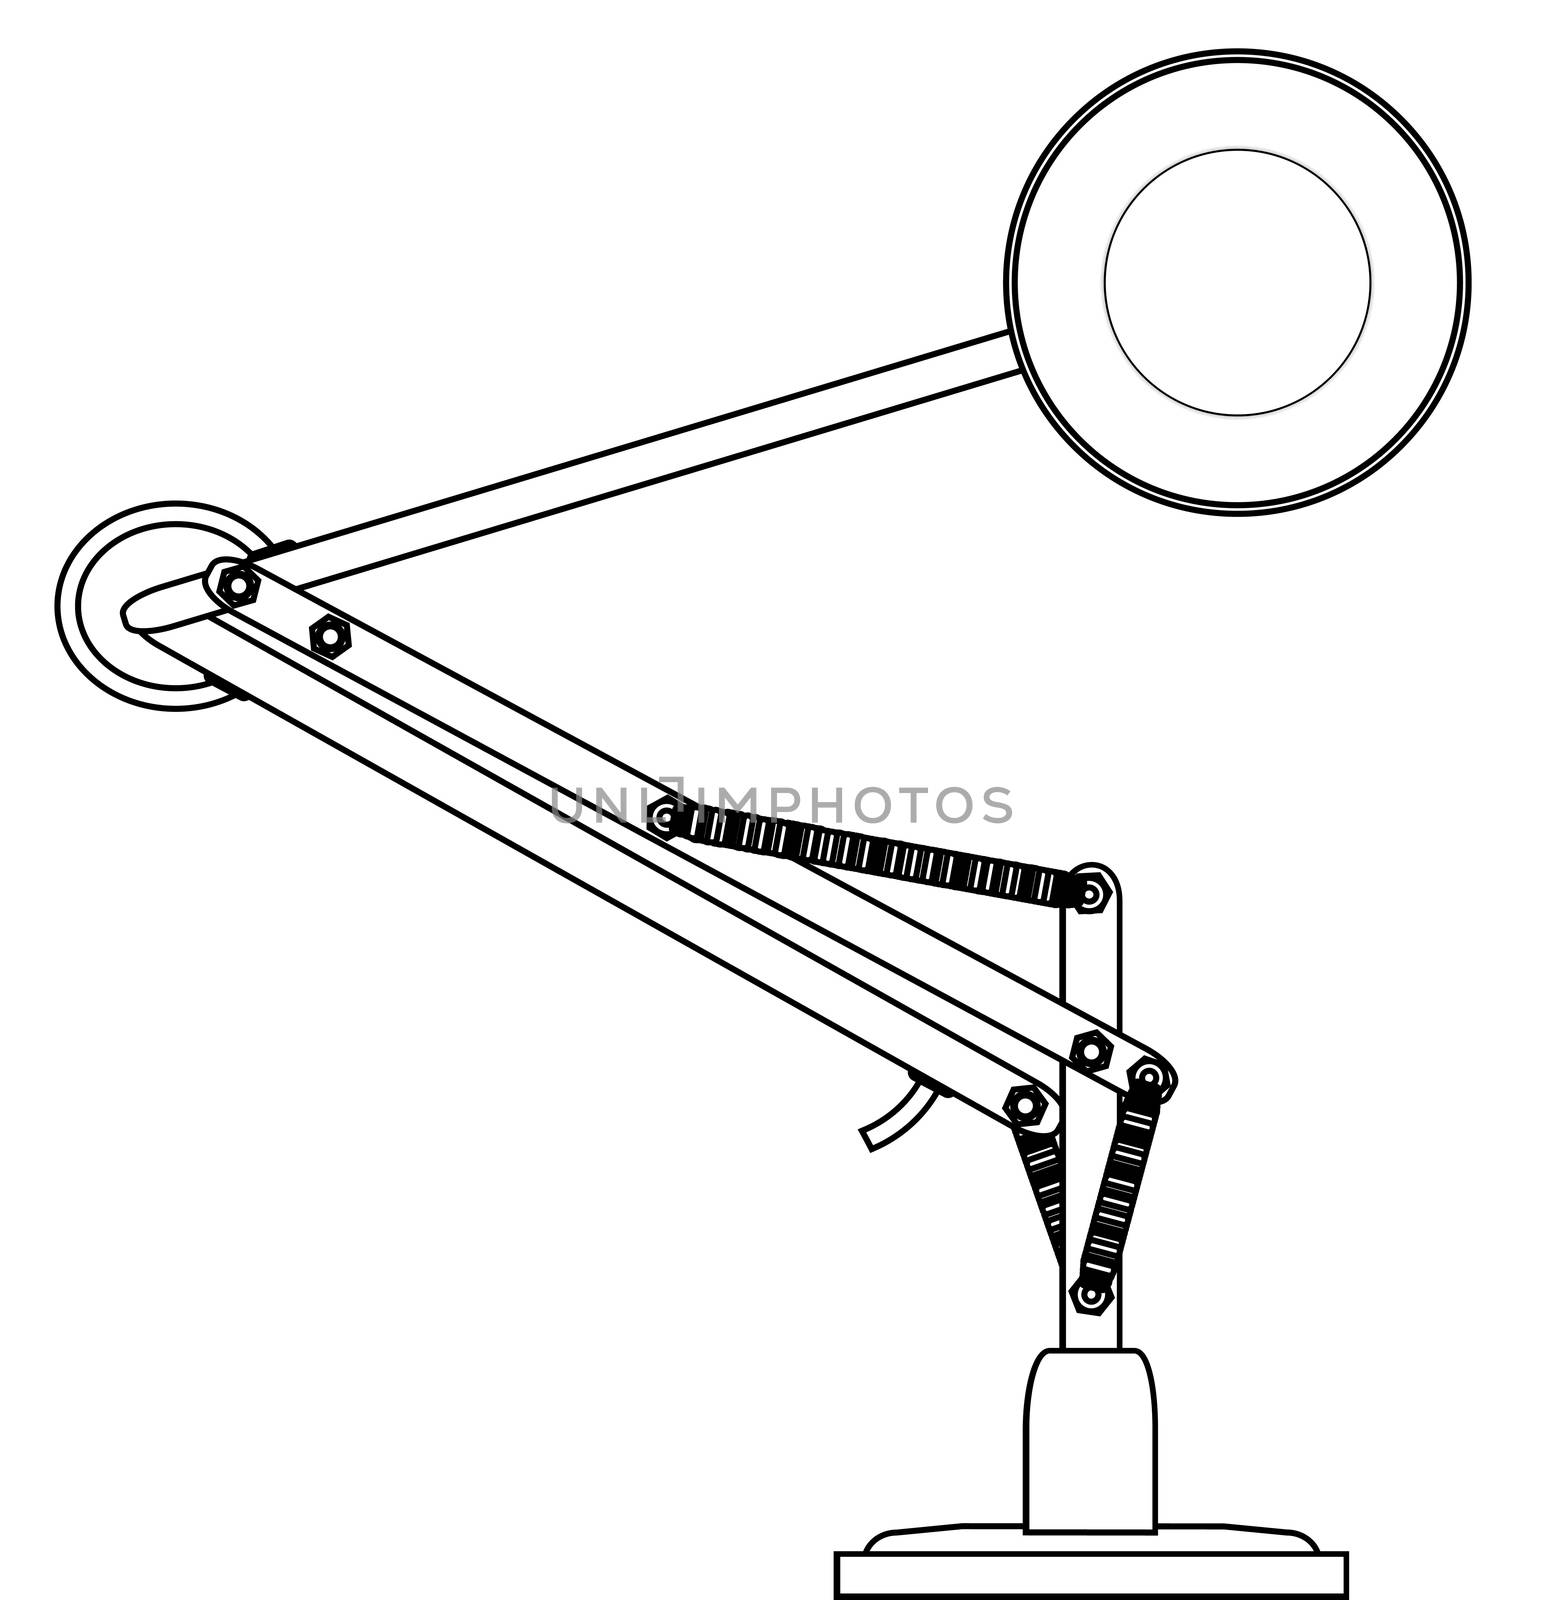 Typical anglepoise lamp in black outline with a white background.